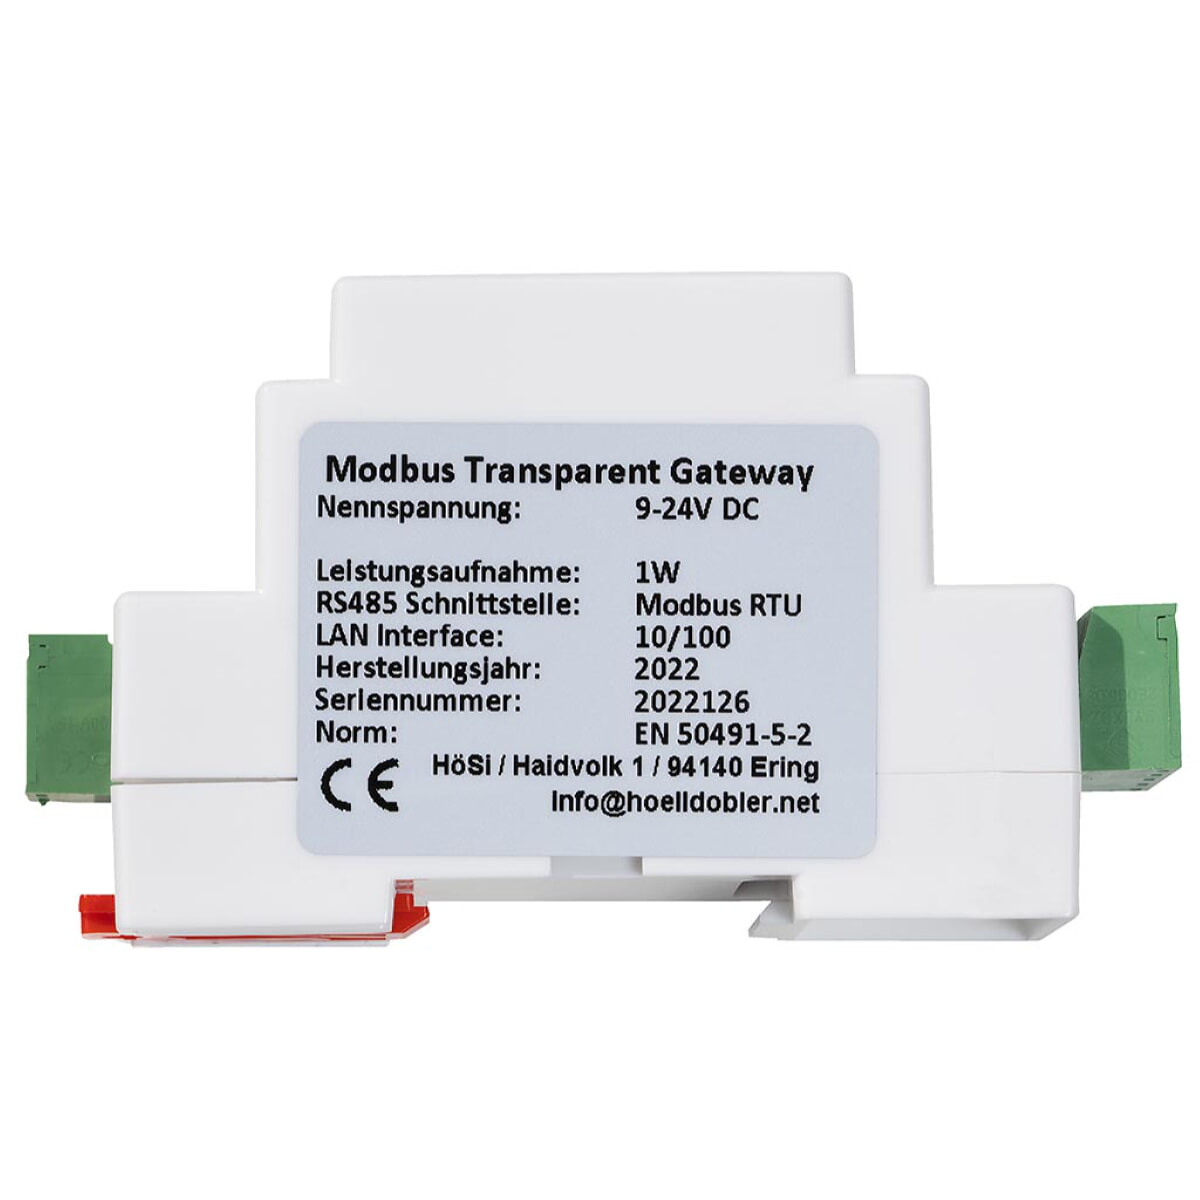 Modbus Gateway RS485 - ETH incl. power supply for SolaX